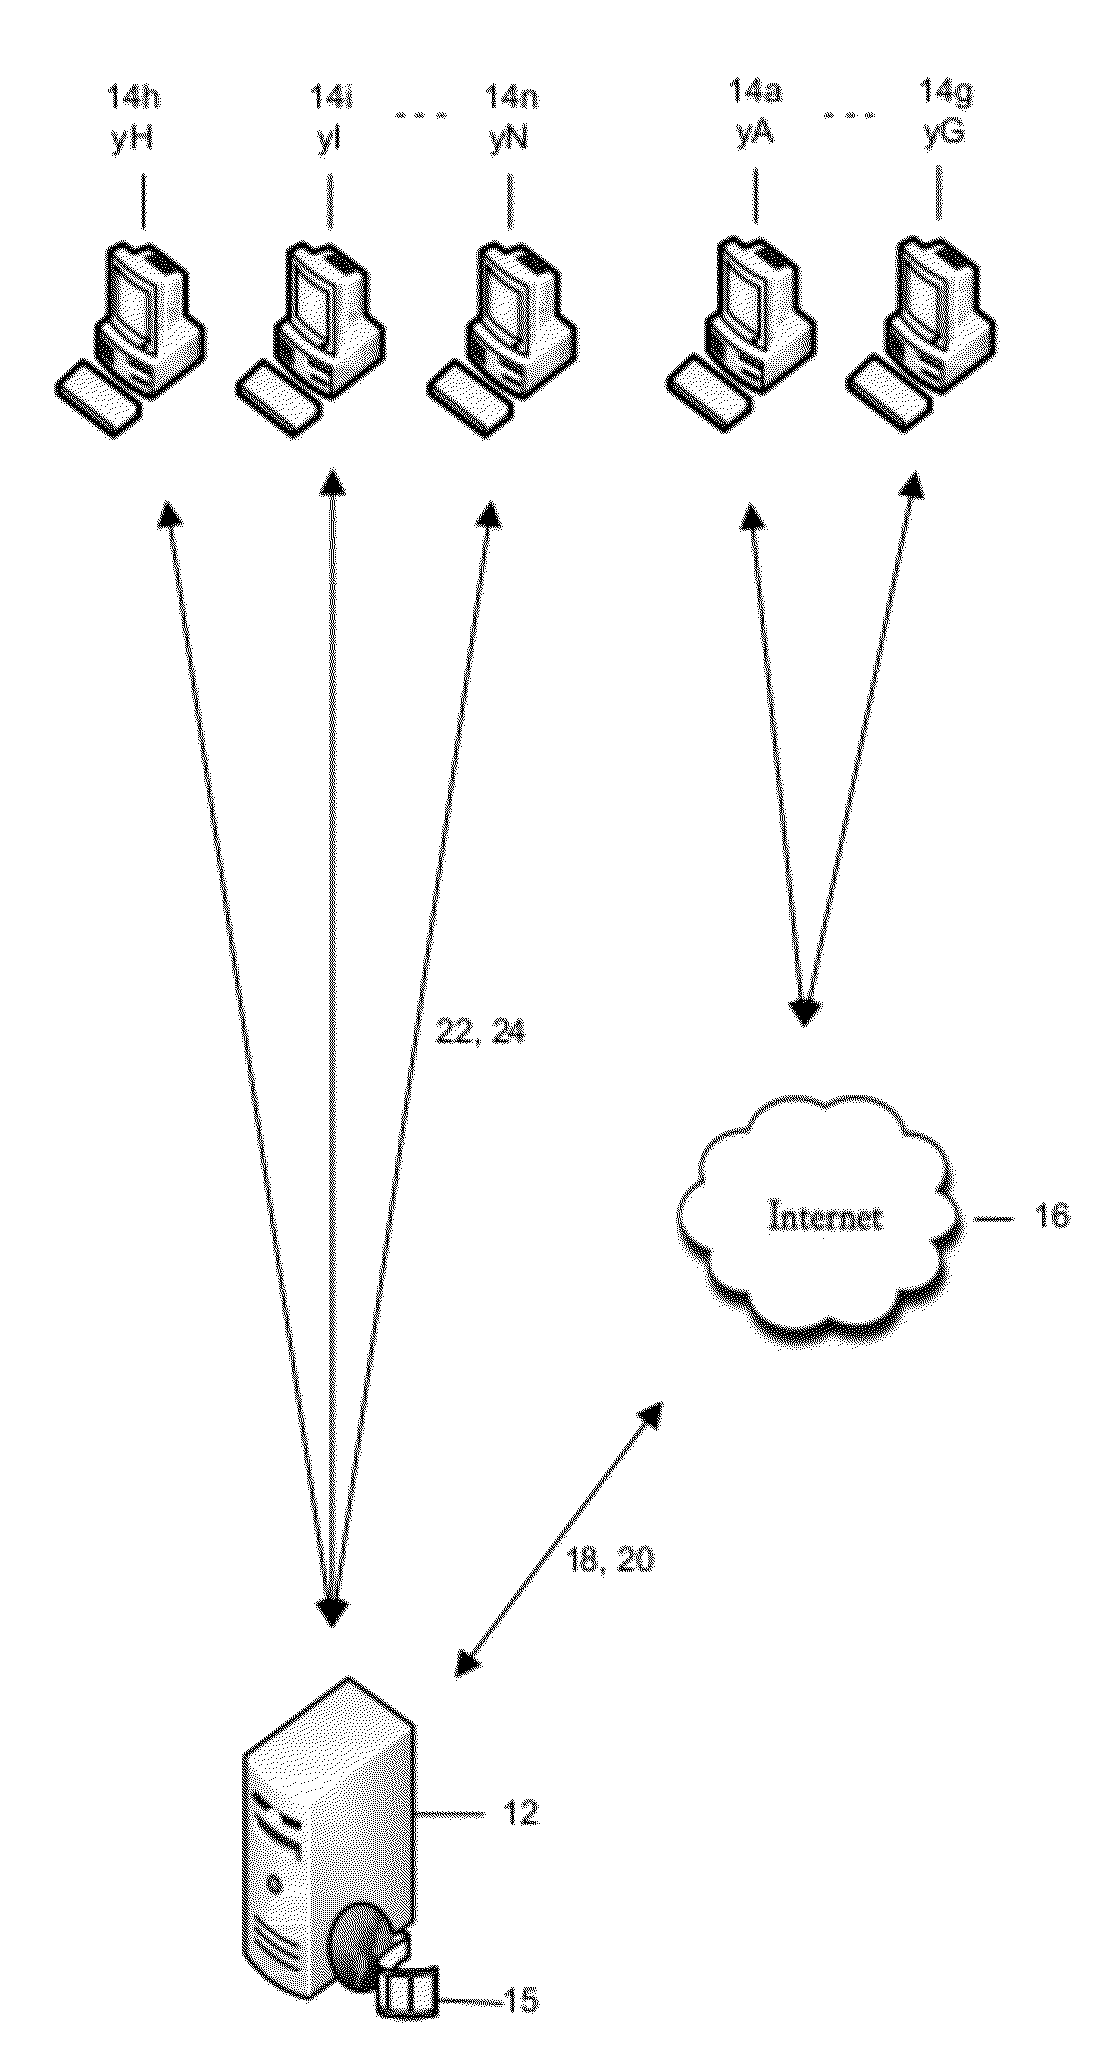 Method and system for pacing, acking, timing, and handicapping (PATH) for simultaneous receipt of documents employing encryption